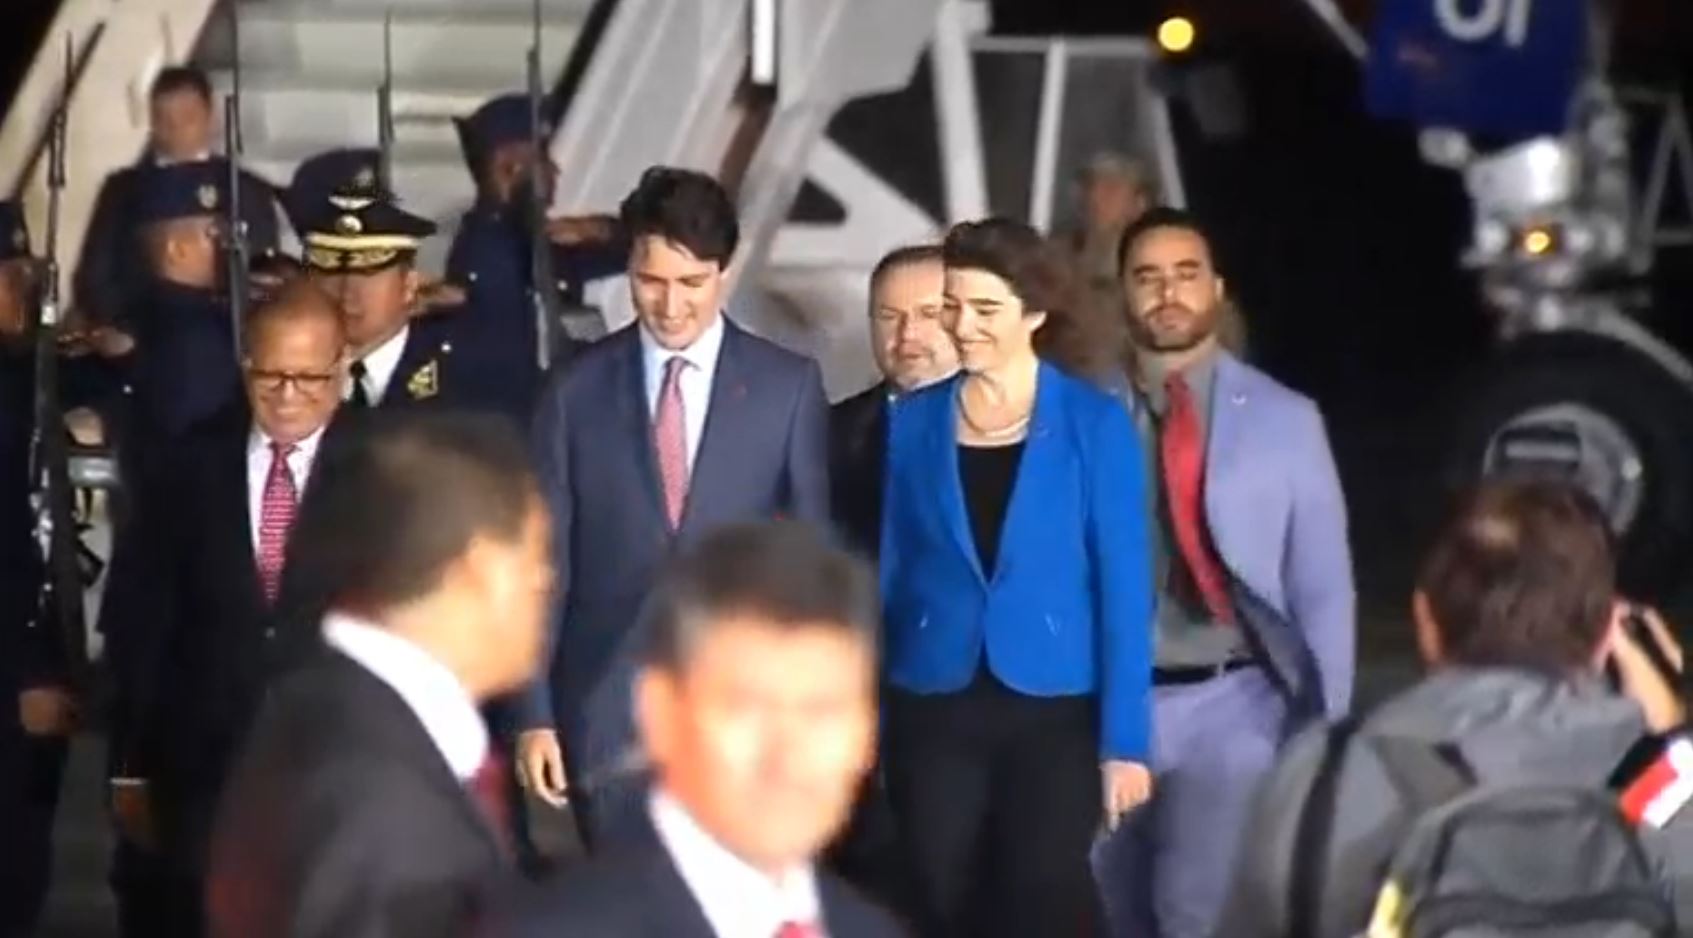 Canada's Prime Minister Justin Trudeau is seen here walking at the airport in Lima, Peru after his arrival.  (Photo grabbed from Reuters video)